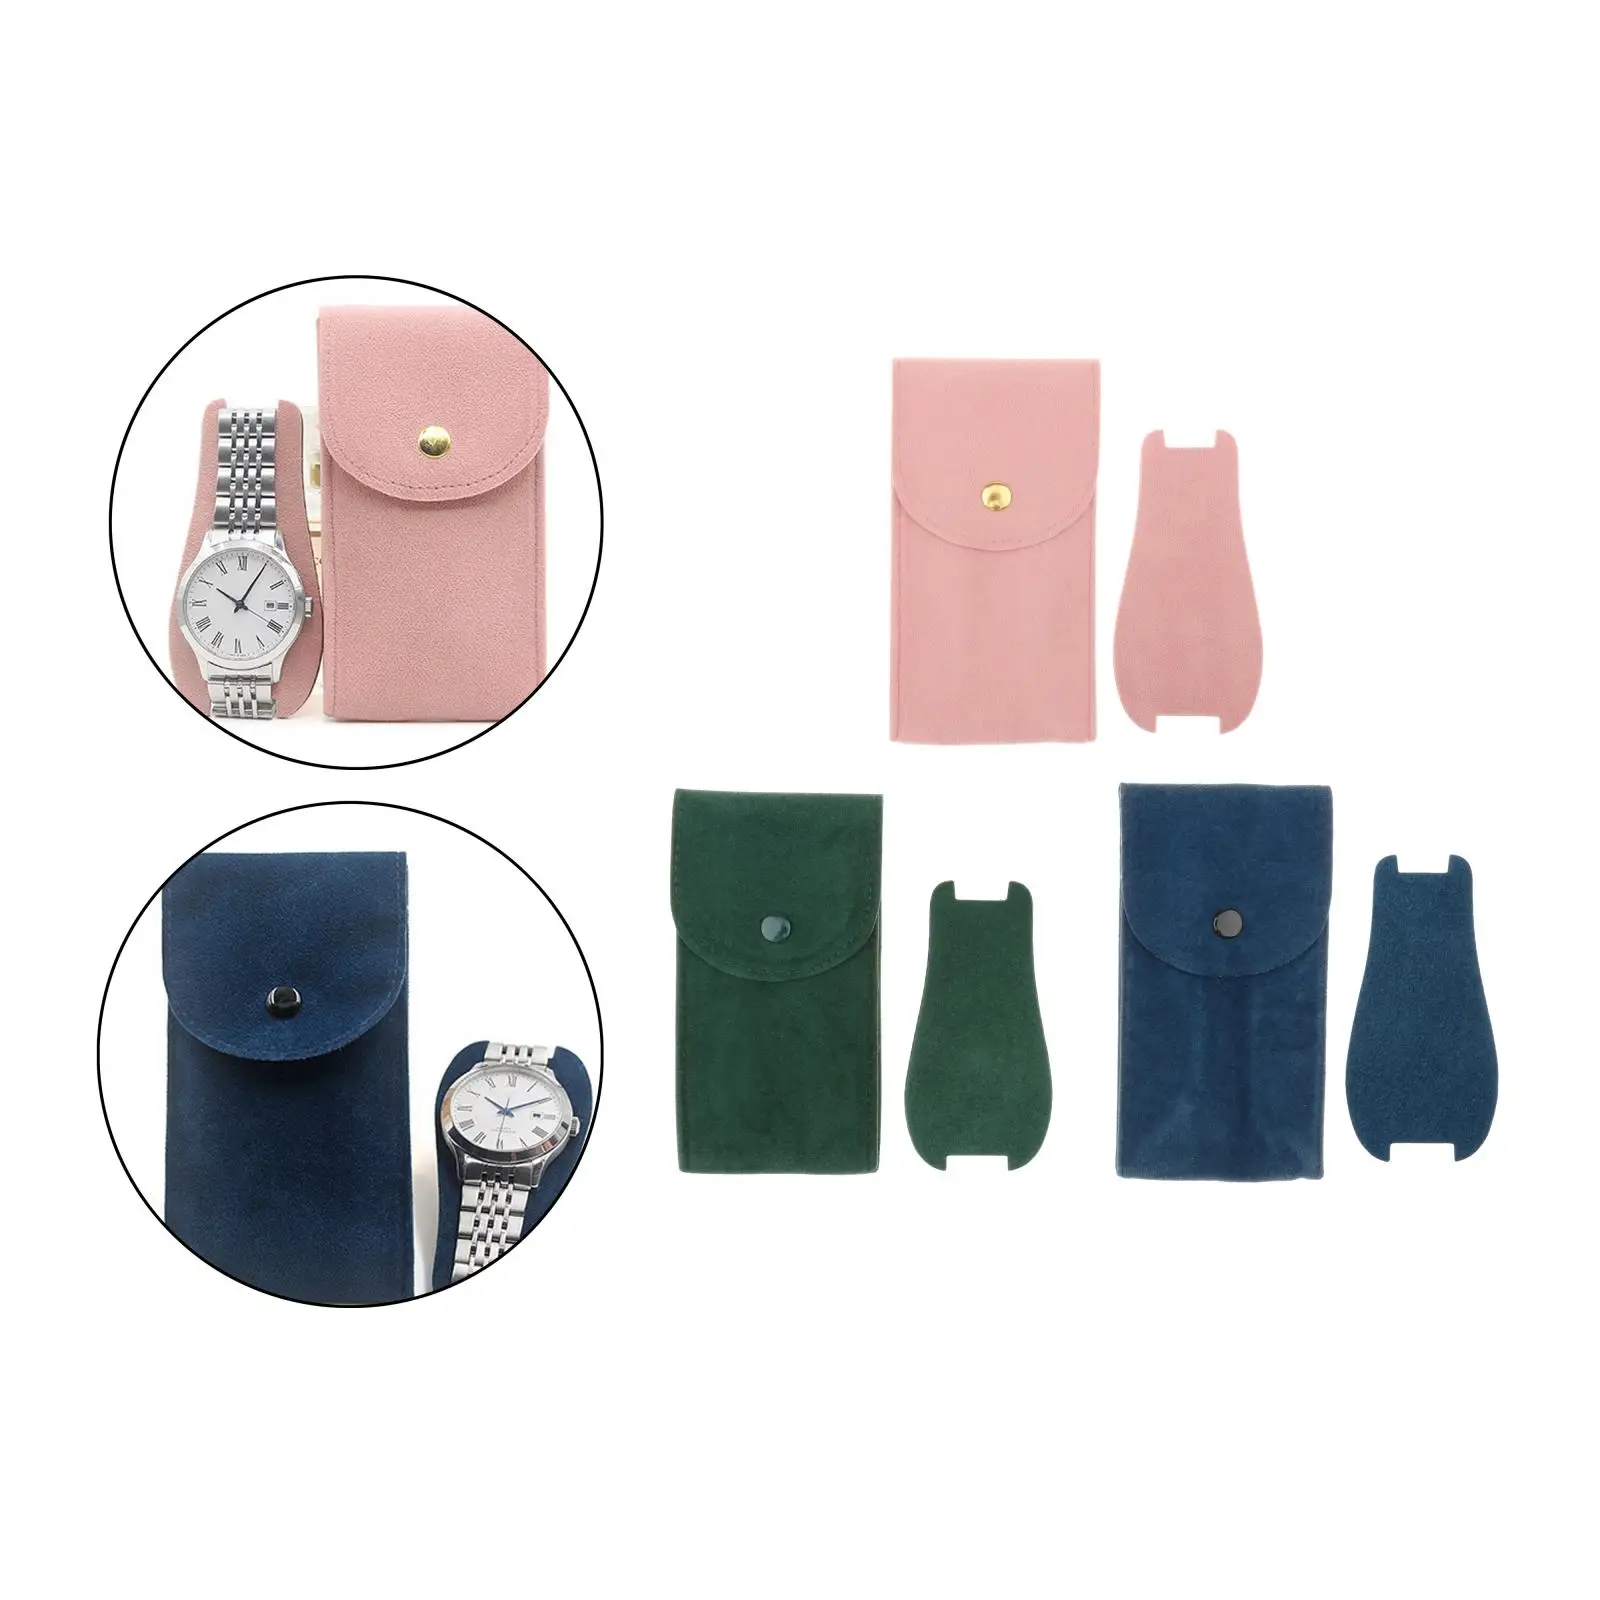 1 Slots Chic Watch Storage Bag Travel Pouch for Watches Jewelry Accessory